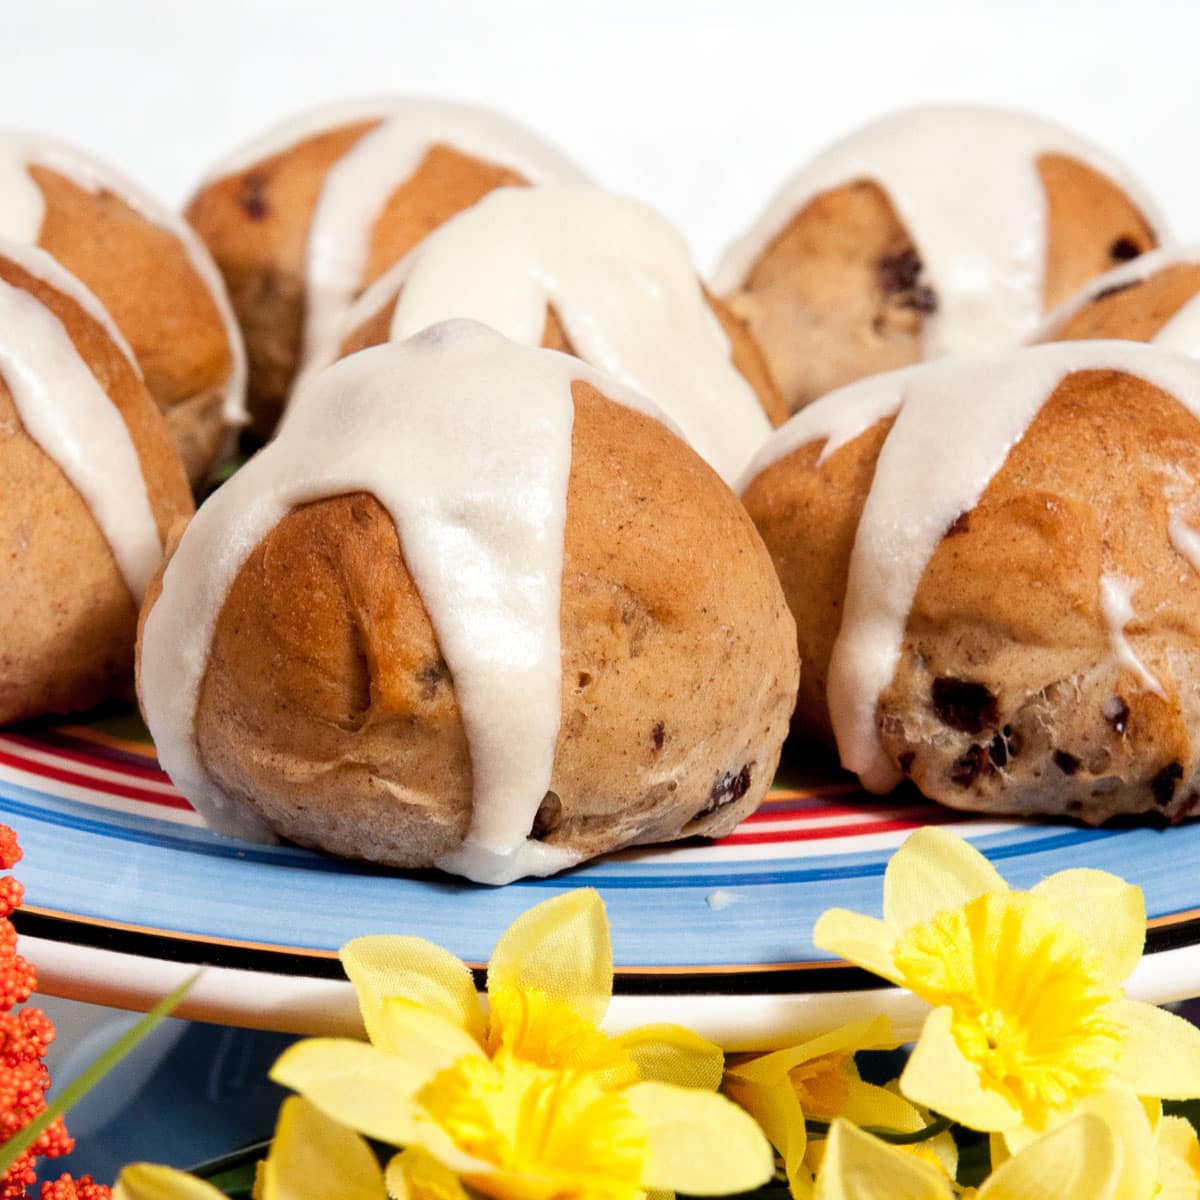 A photo of Hot Cross Buns on a colored cake plate surrounded by yellow daffodils.